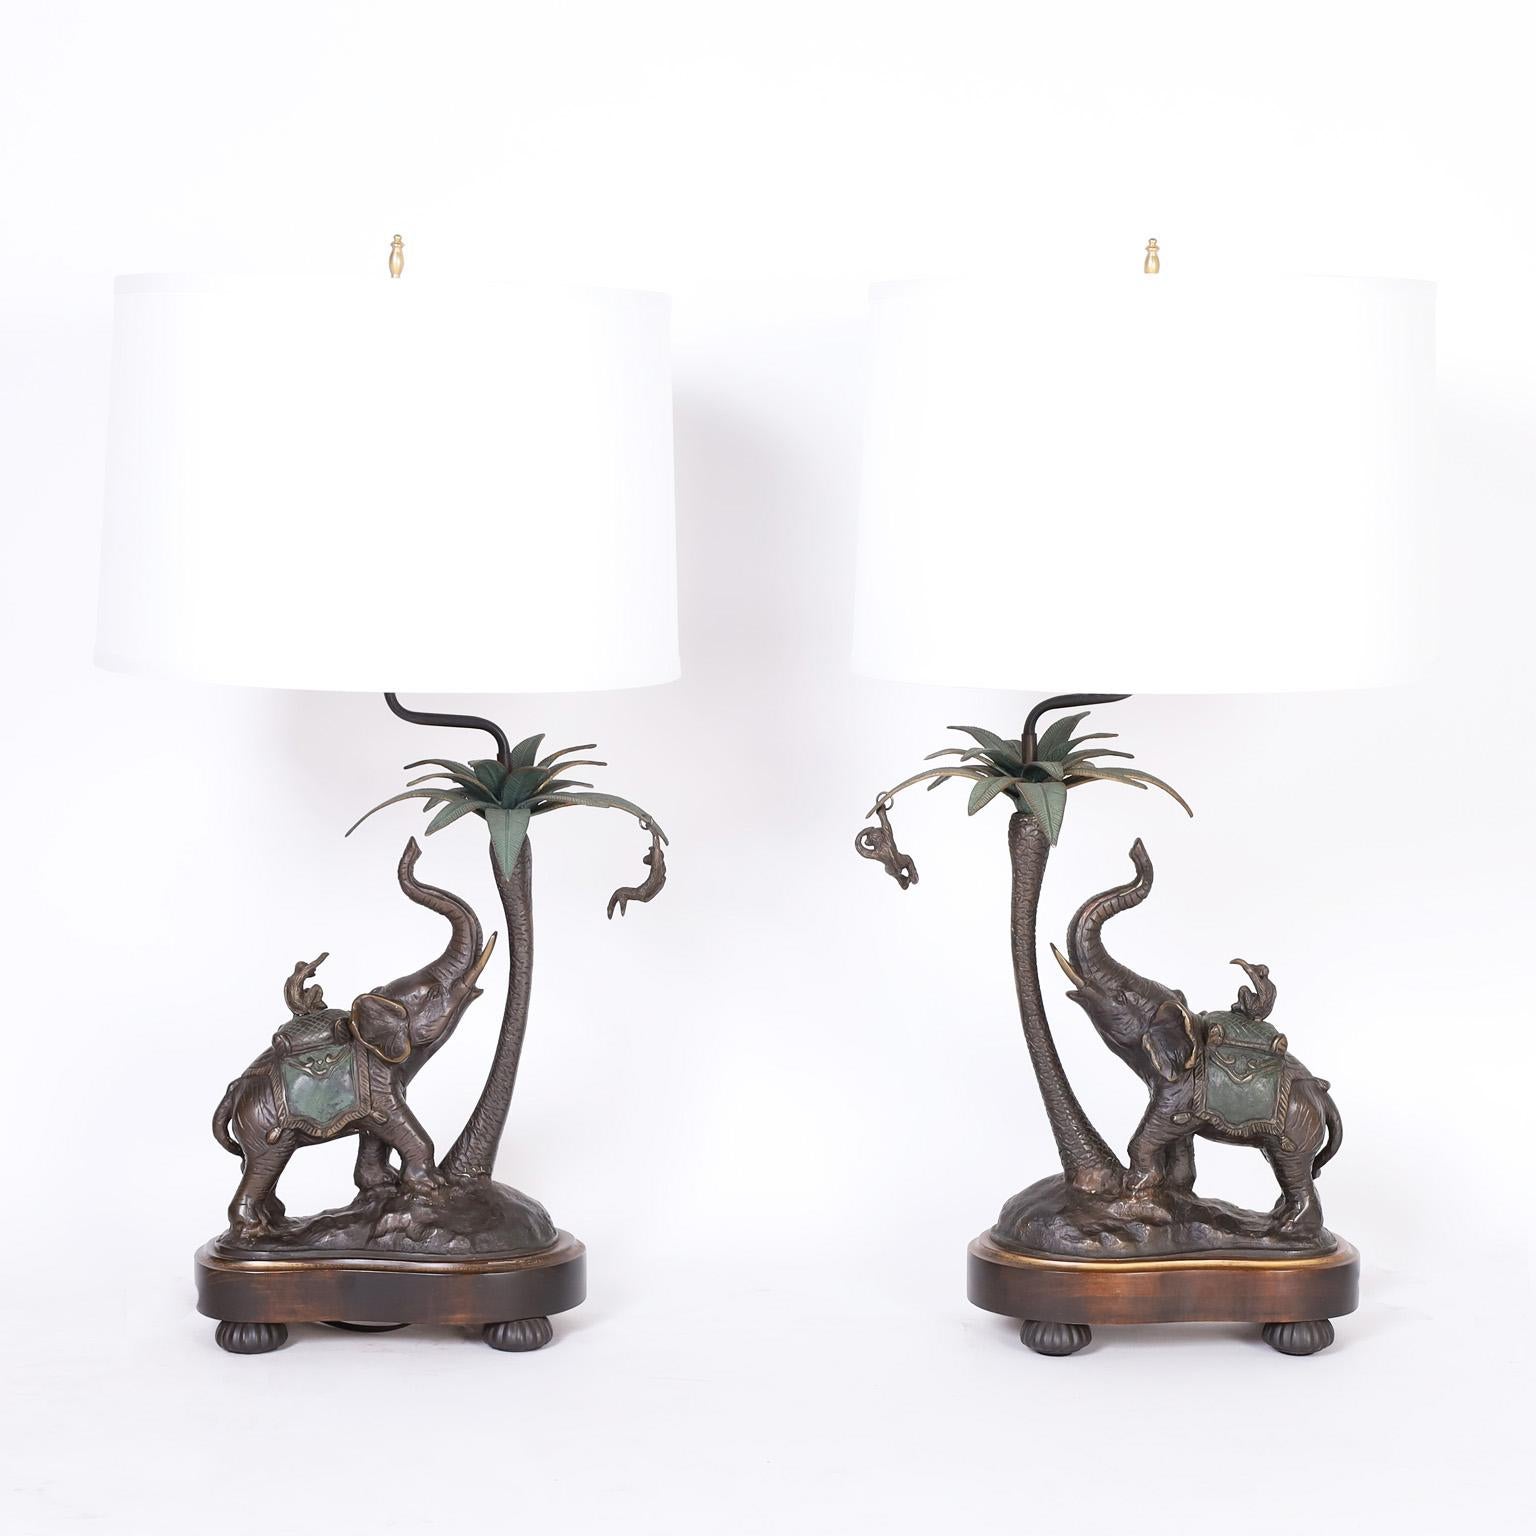 Pair of table lamps by Frederick Cooper with a bit of whimsy, crafted in bronze depicting a monkey riding an elephant under a palm tree with another monkey in it. Presented on an organic form wood base on beaded bronze feet.